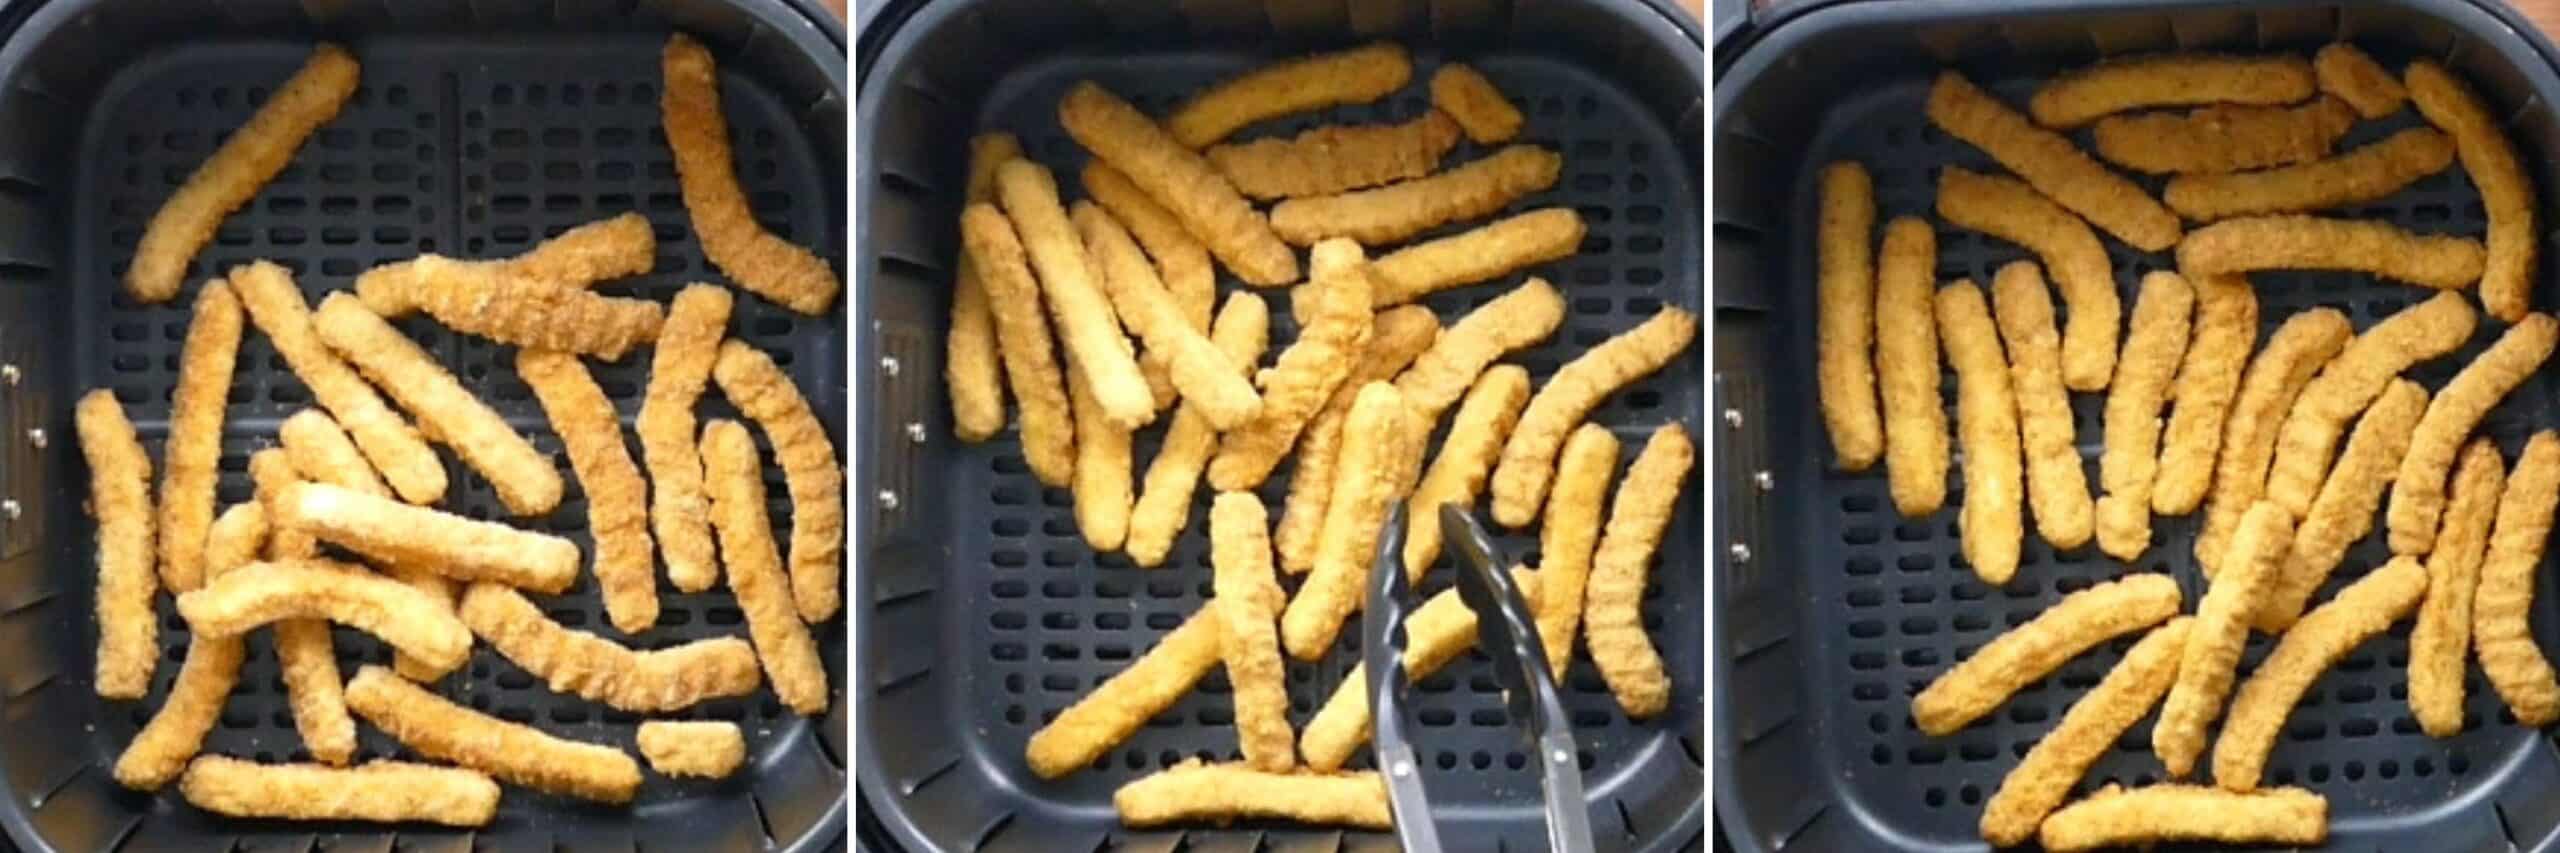 Air fryer chicken fries collage - frozen chicken fries in air fryer, being turned with tongs, cooked chicken fries